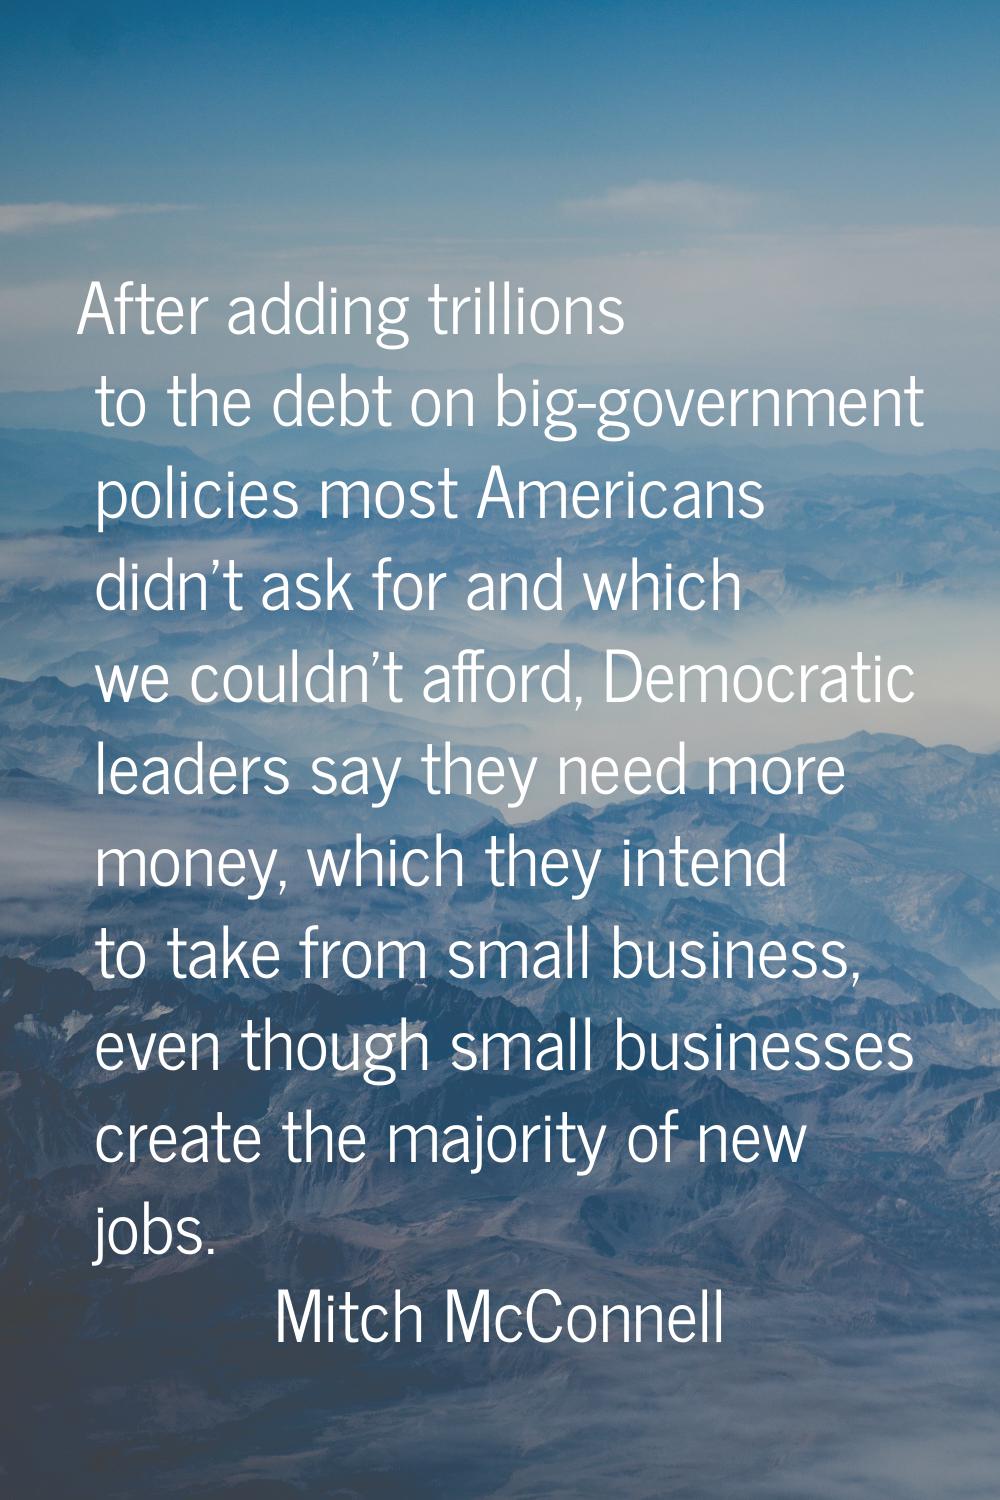 After adding trillions to the debt on big-government policies most Americans didn't ask for and whi